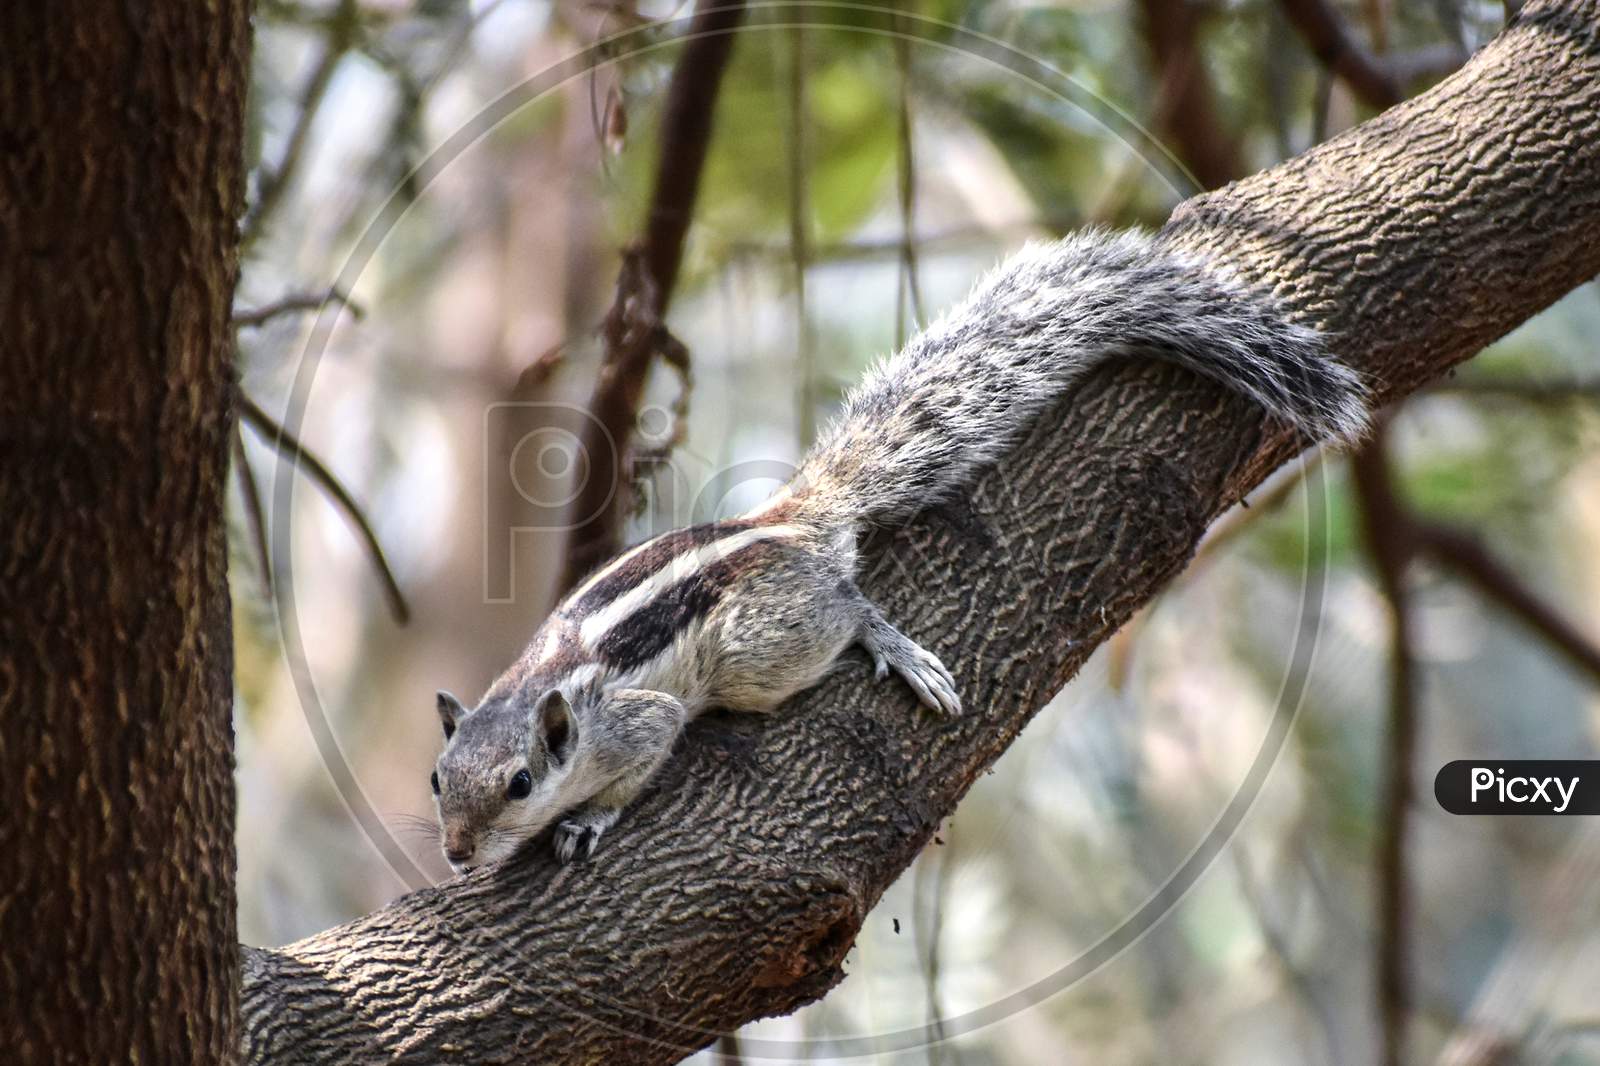 Portrait of an Indian squirrel on a tree